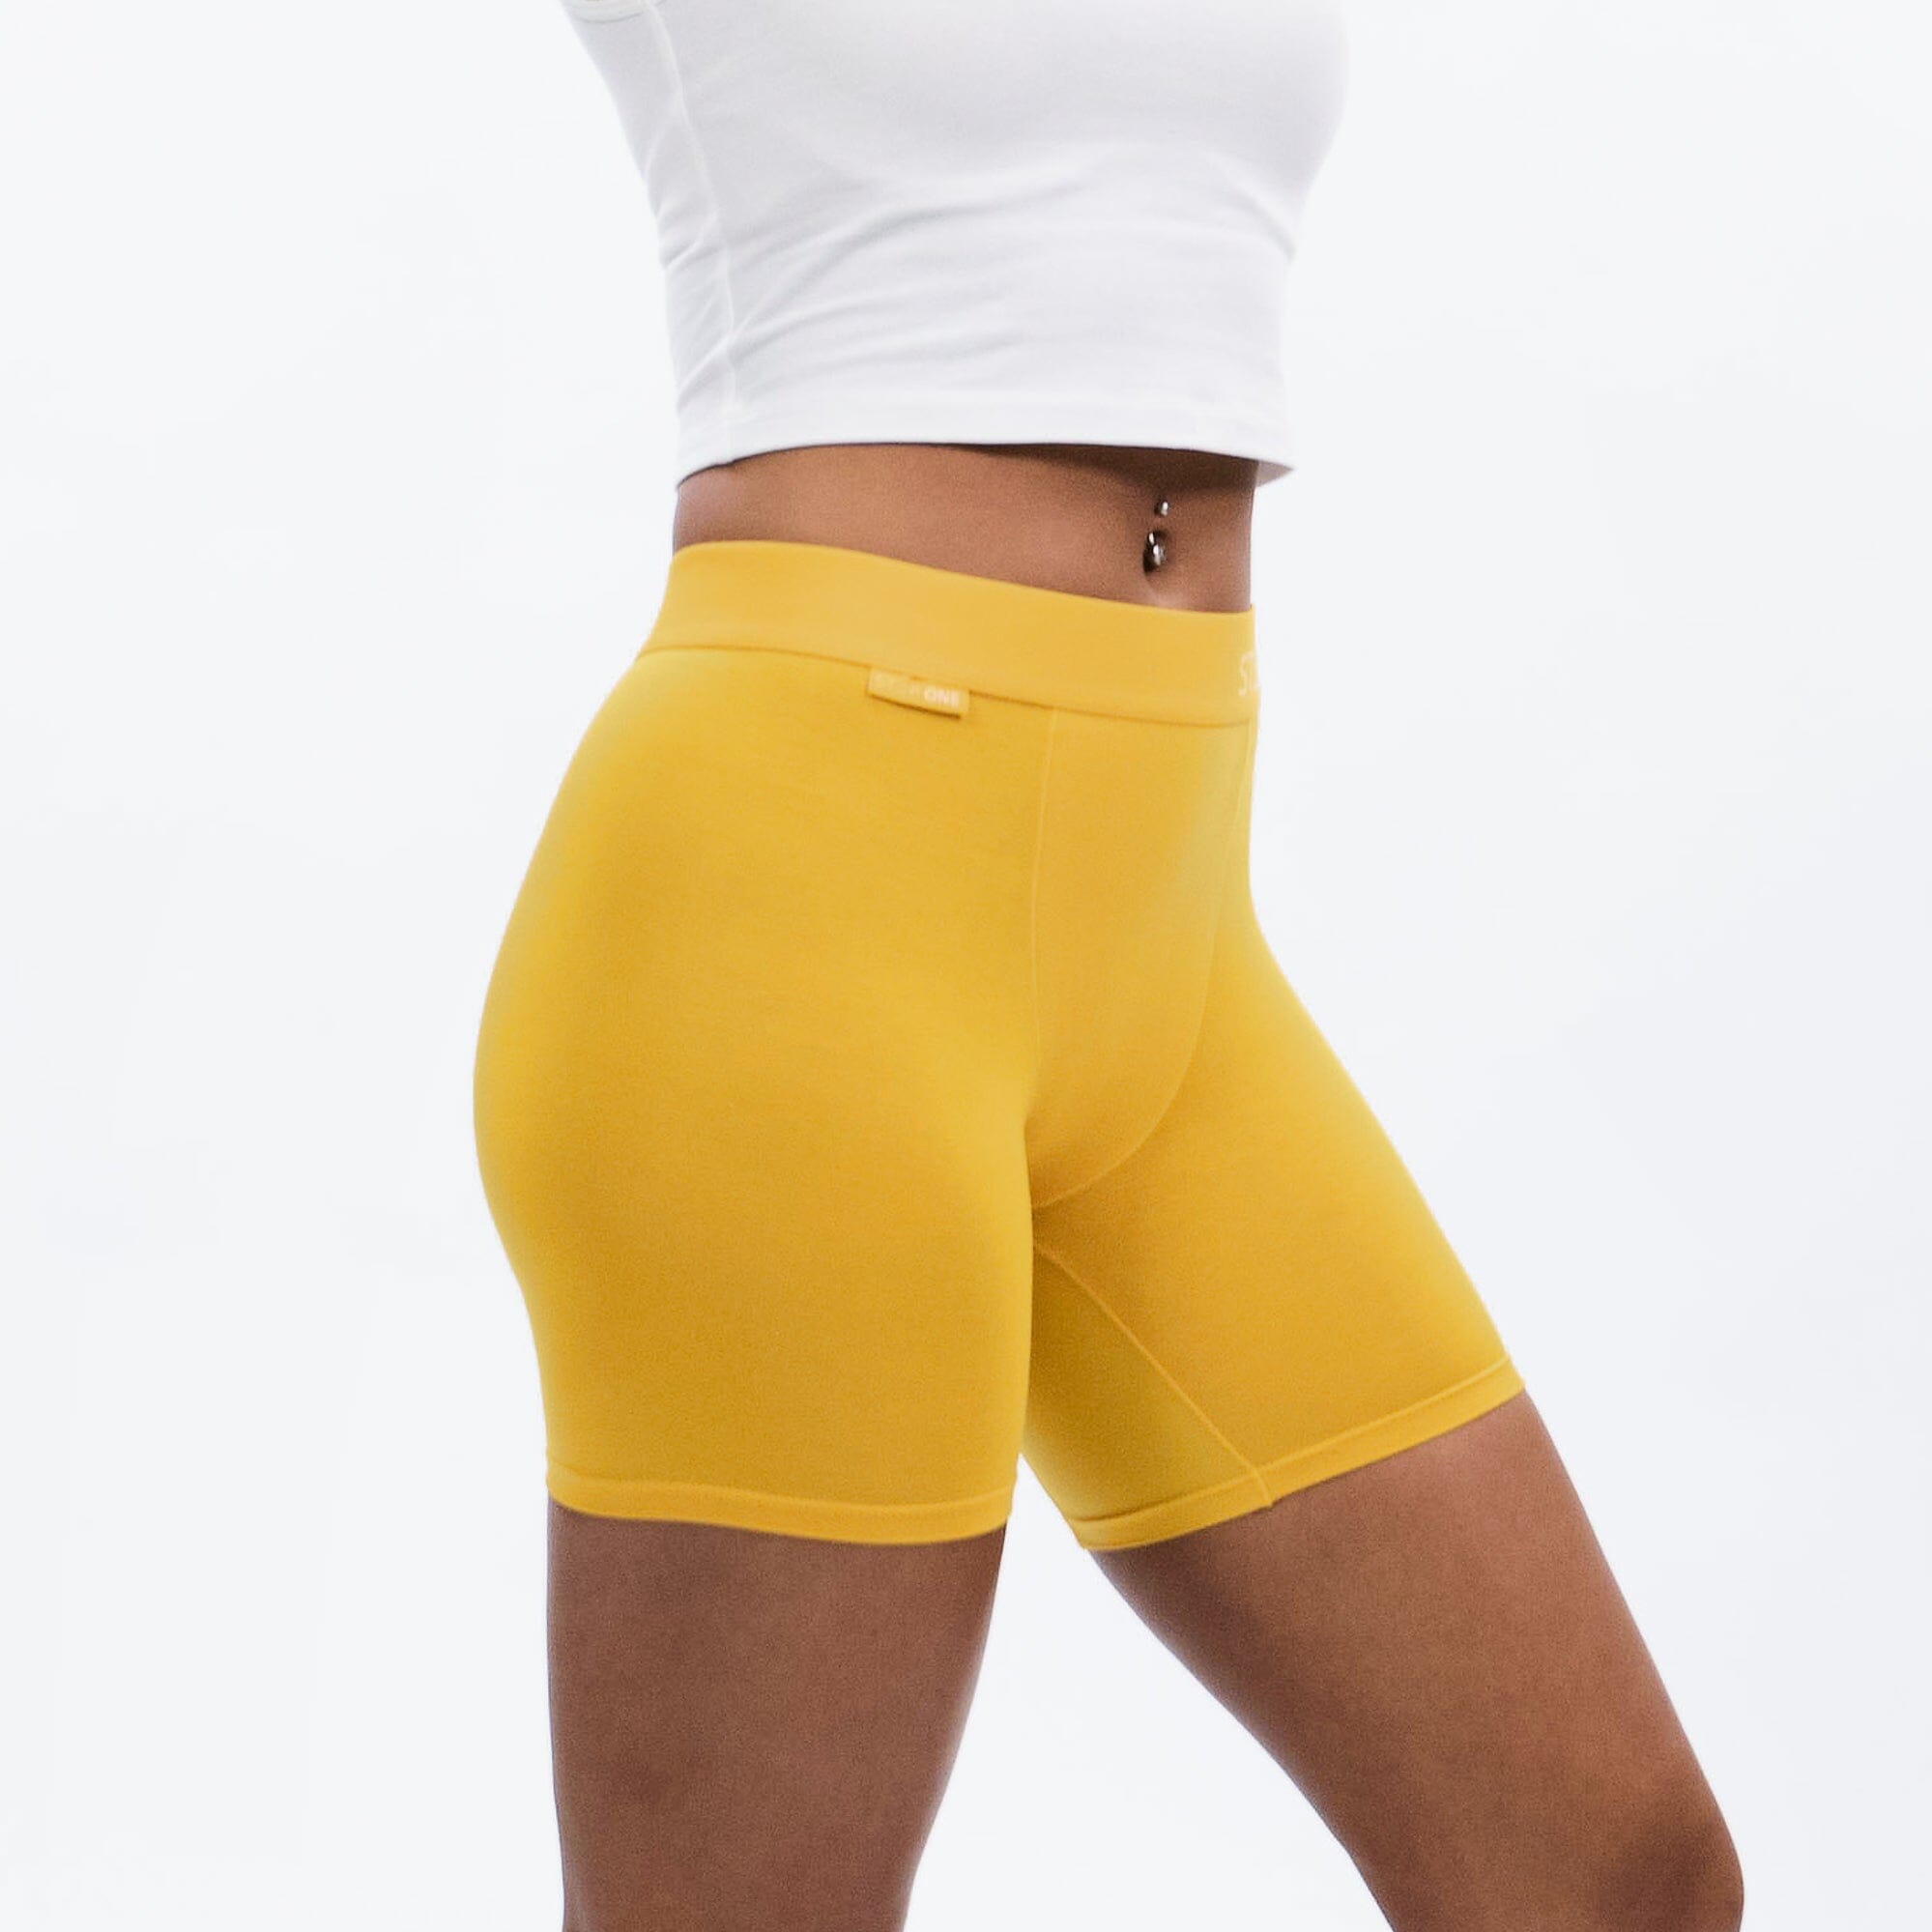 Women's Boxer Brief - Cheeky Cheddars - Model - #size_Large